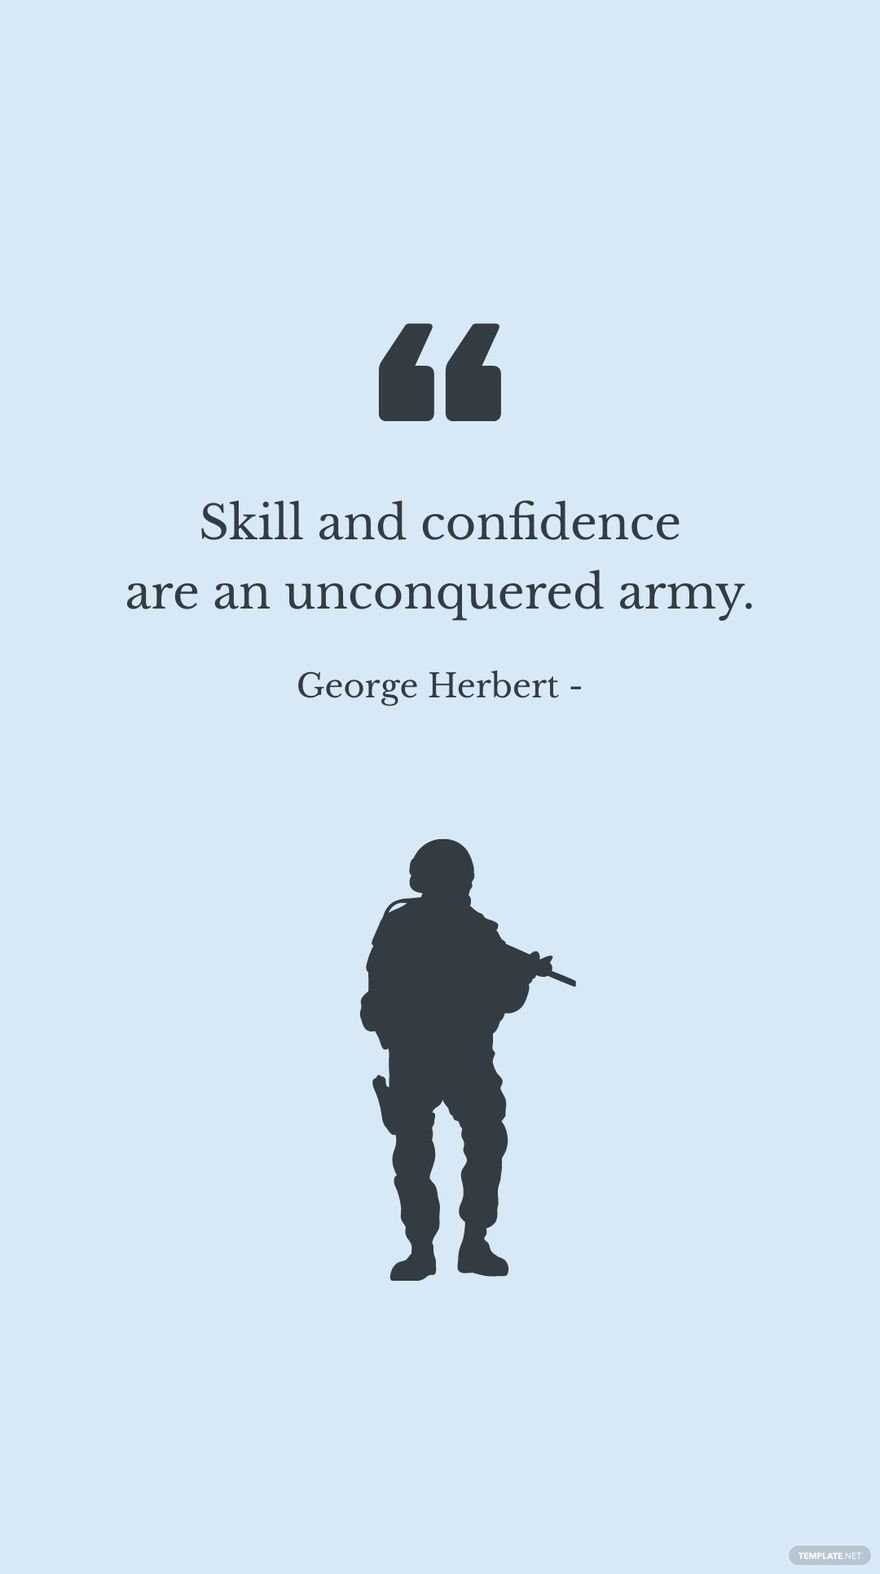 George Herbert - Skill and confidence are an unconquered army. in JPG